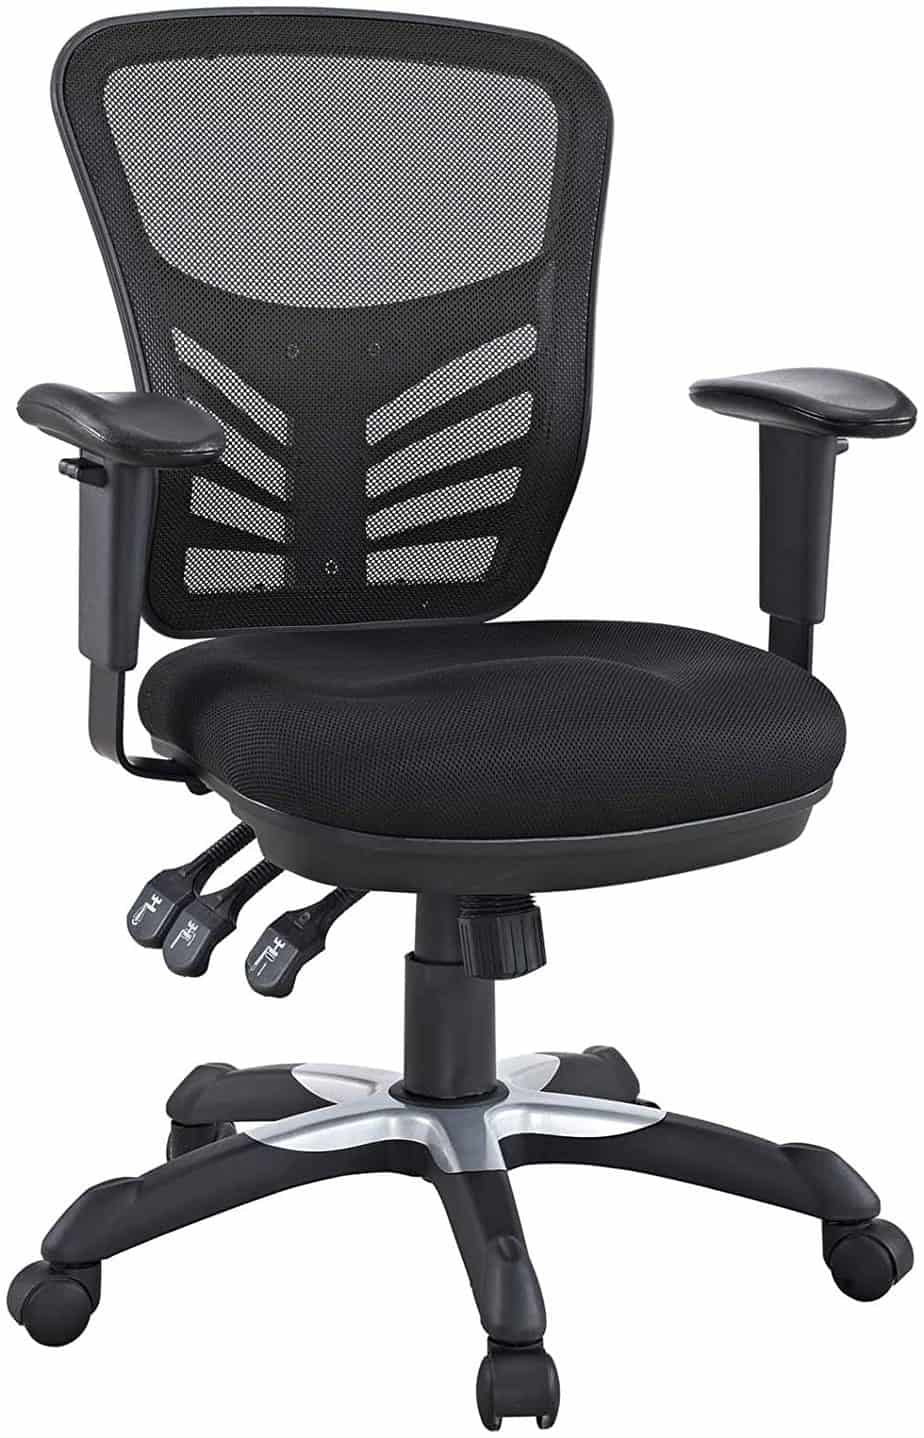 Modway Articulate Ergonomic Mesh Office chair - best office chair for sciatica